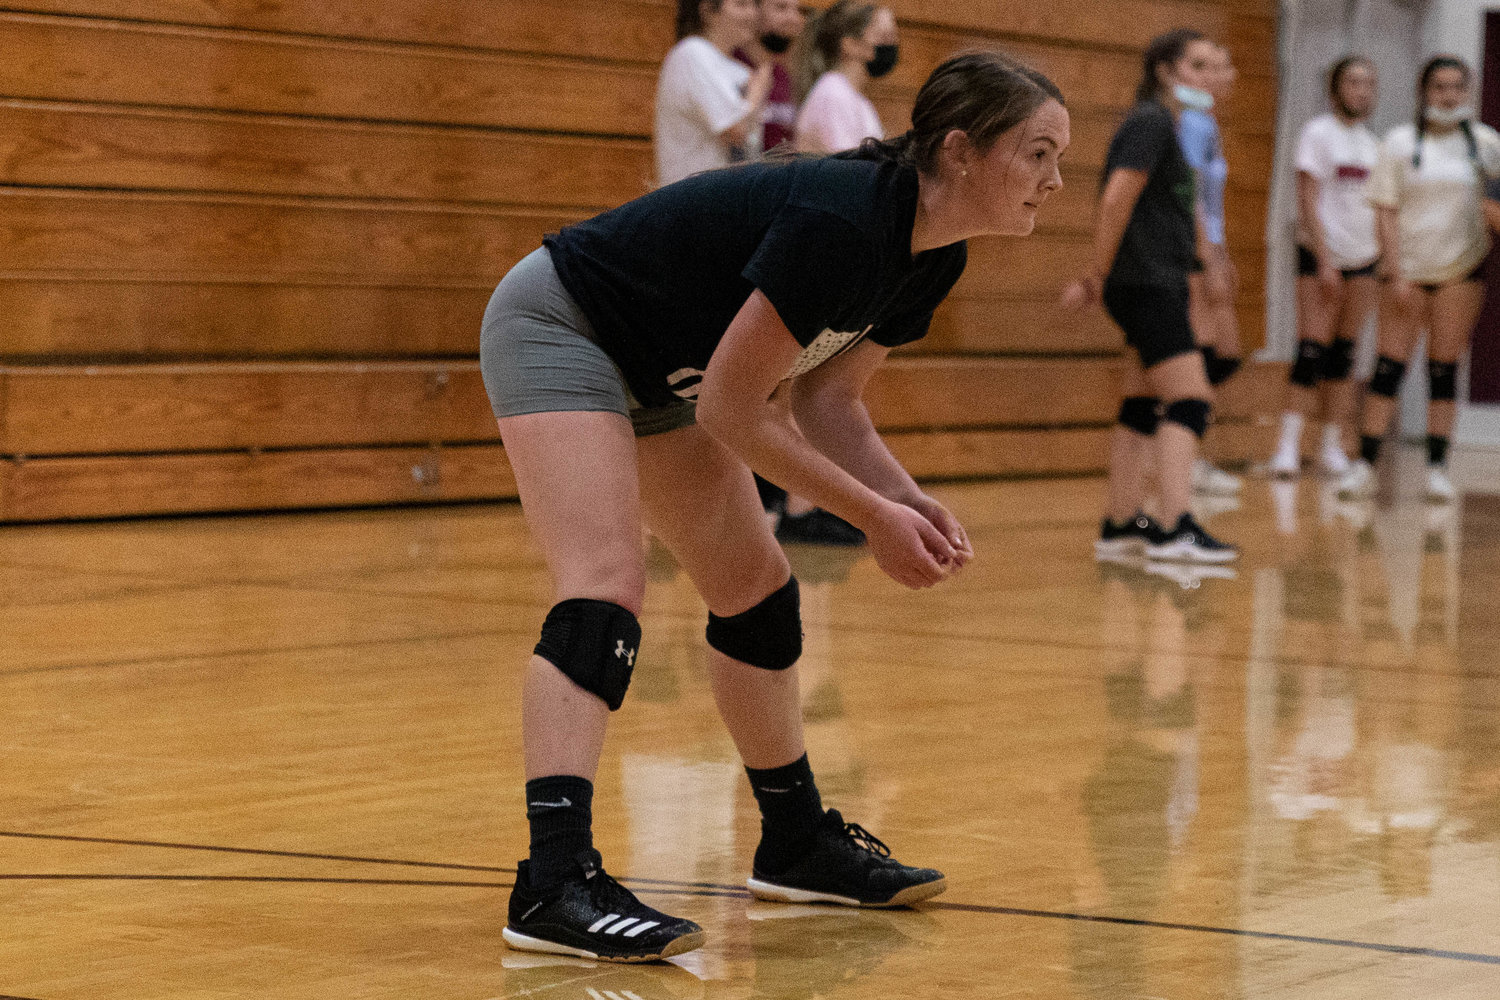 Senior Kambriah Simper gets ready before a point during W.F. West volleyball practice Tuesday afternoon.